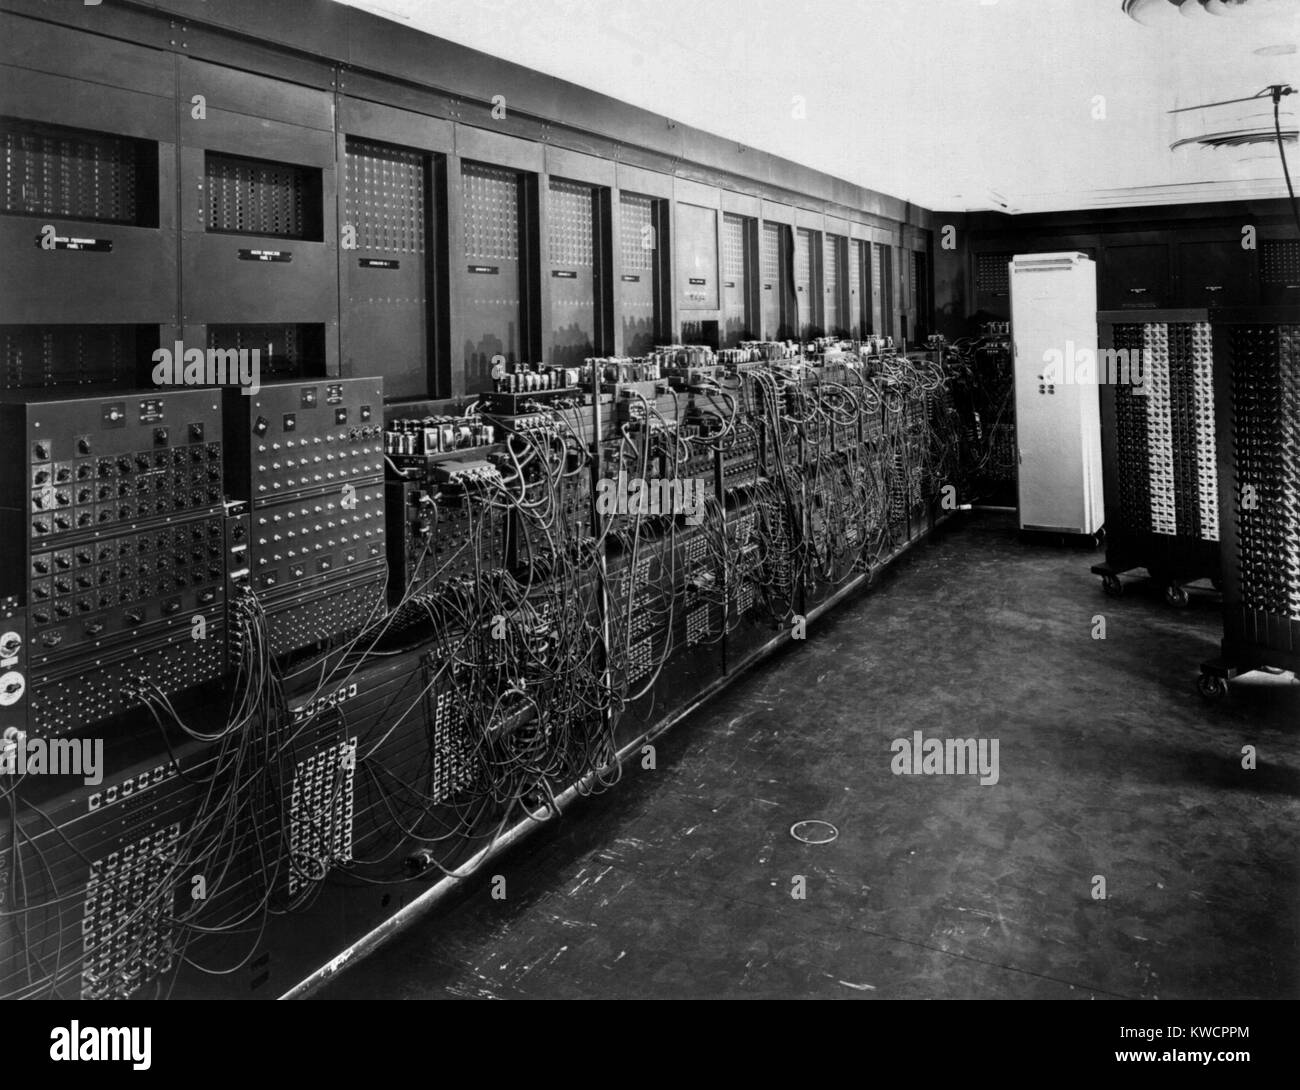 ENIAC computer was the first general-purpose electronic digital computer. 'Electronic Numerical Integrator And Computer' was 150 feet wide with 20 banks of flashing lights. Ca. 1946. - (BSLOC 2015 1 222) Stock Photo